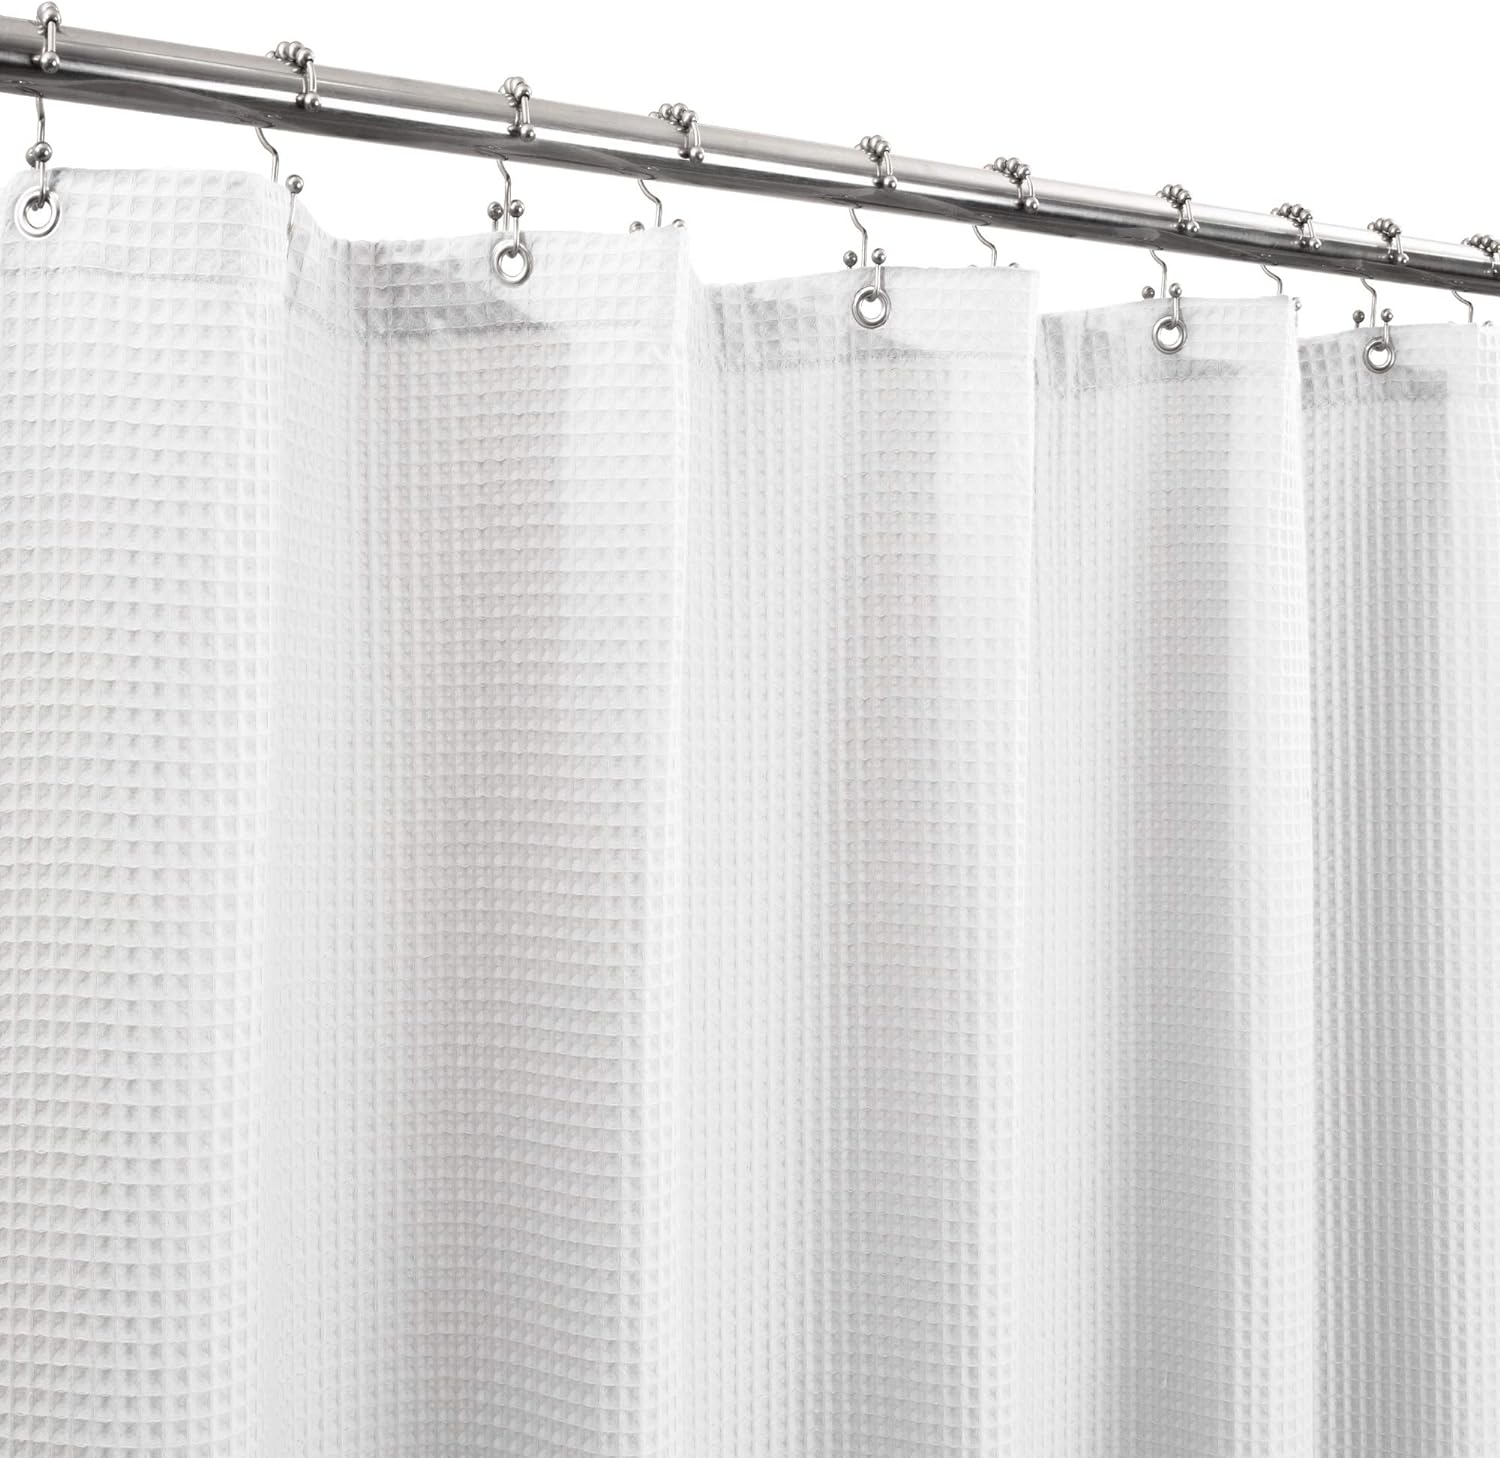 Barossa Design Cotton Blend Shower Curtain Honeycomb Waffle Weave, Soft & Hotel Spa, Washable, White, 72 x 72 inch